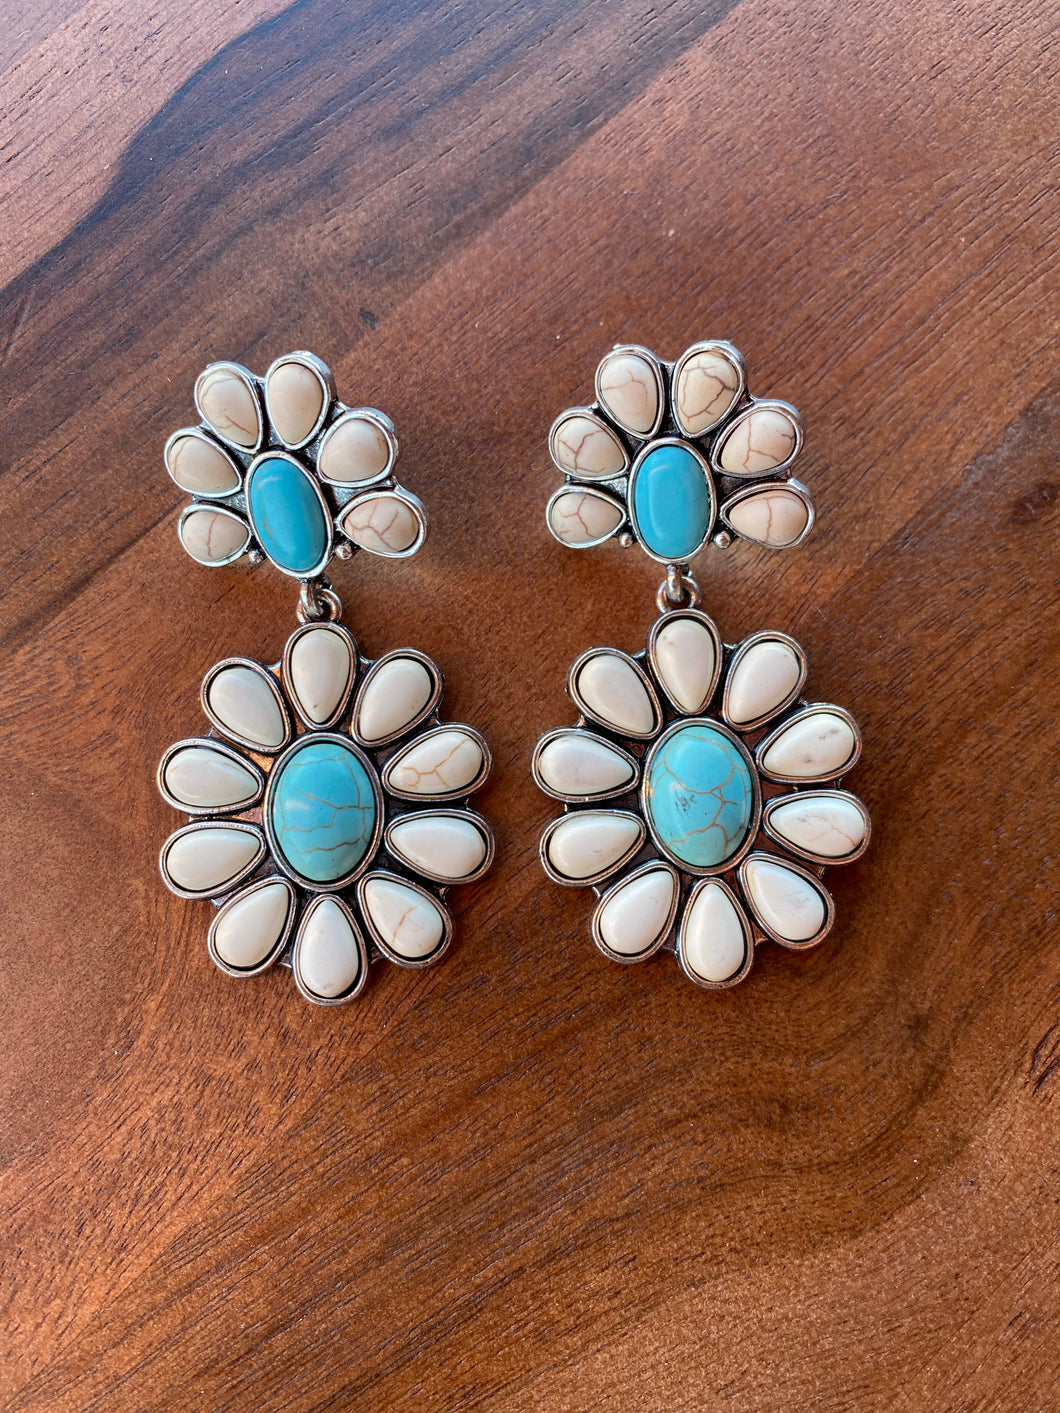 White And Turquoise Blossom Earrings